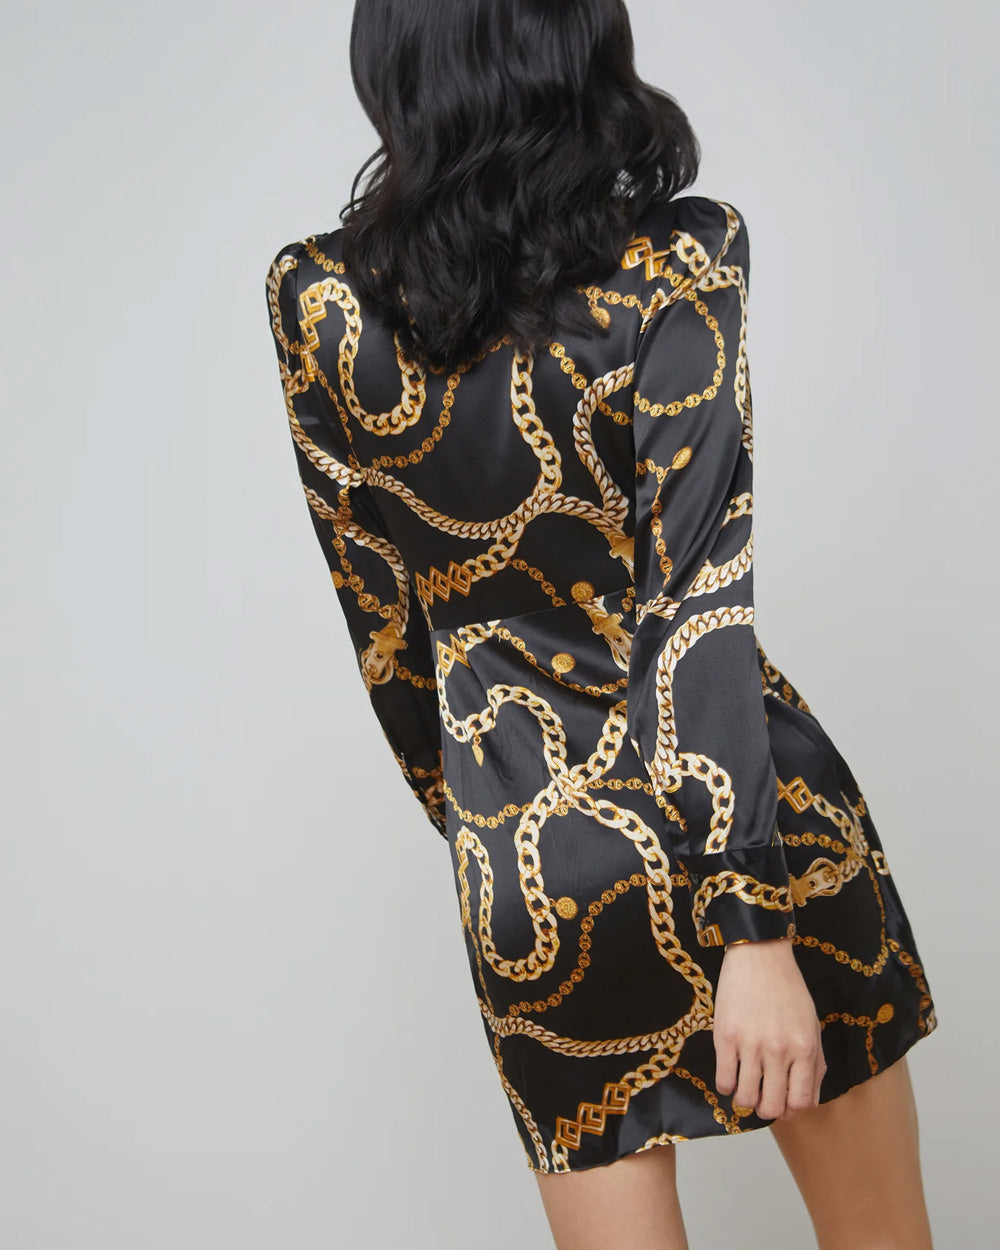 Black and Gold Clarice Buckle Wrap Dress